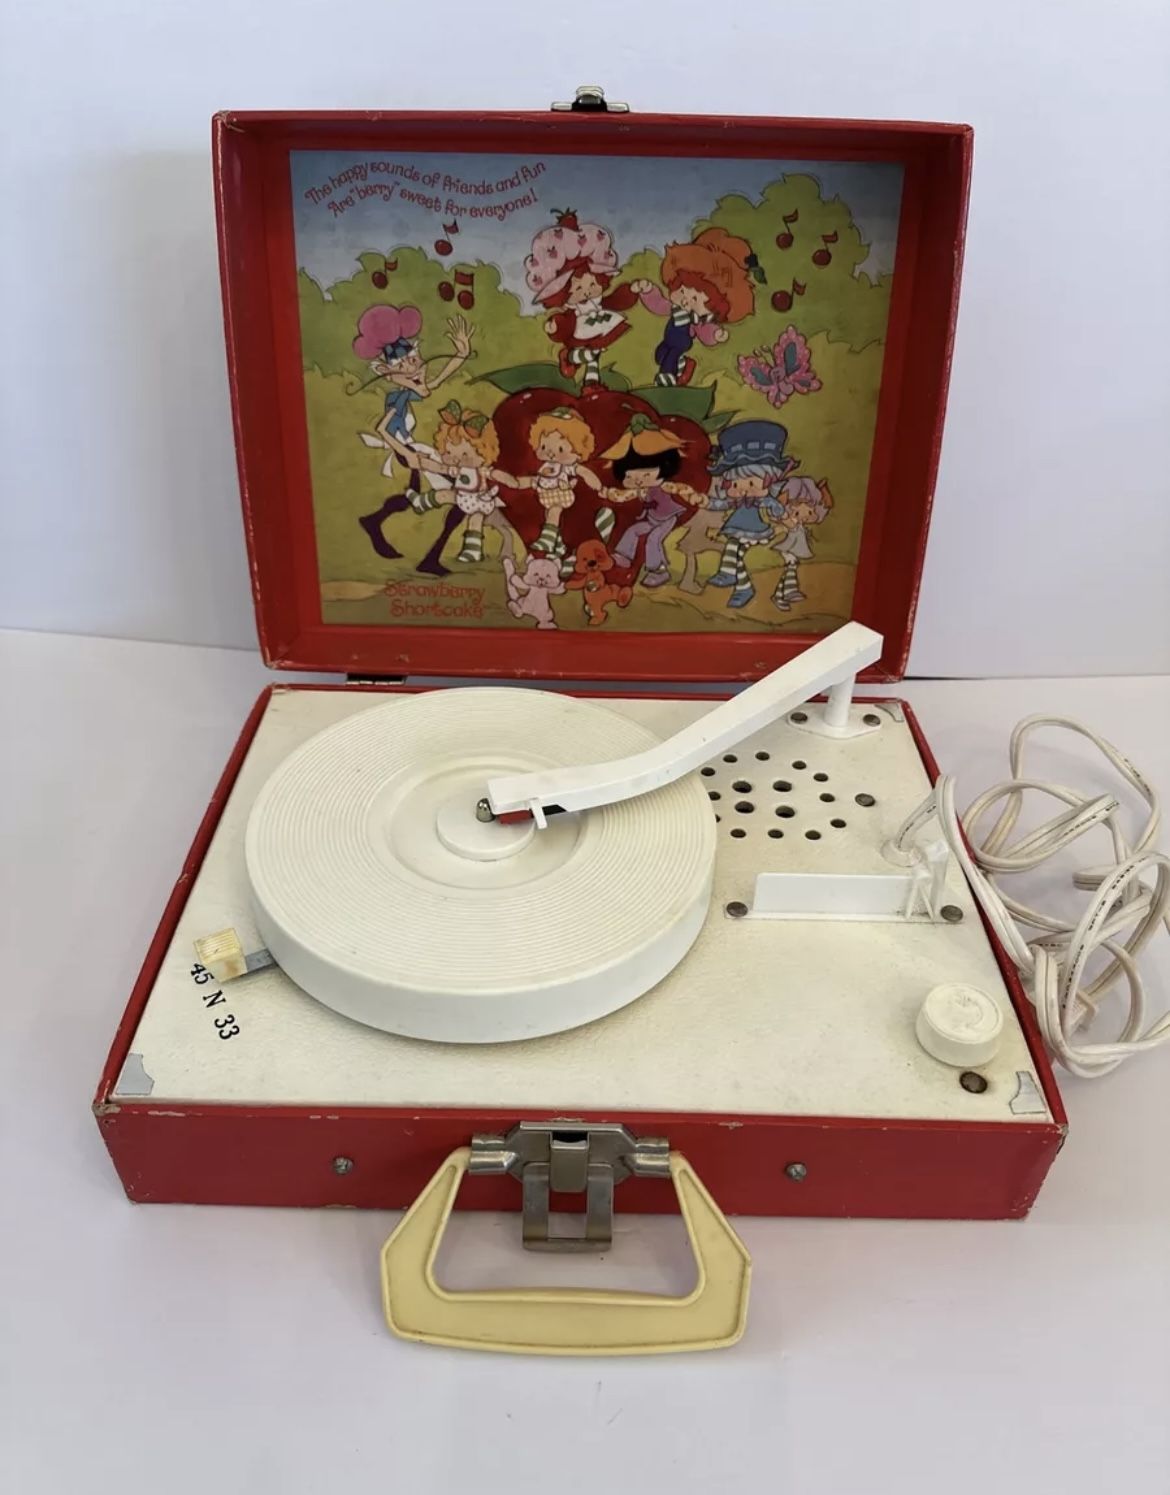 Vintage Strawberry Shortcake Record Player By Playtime - Tested And Working!